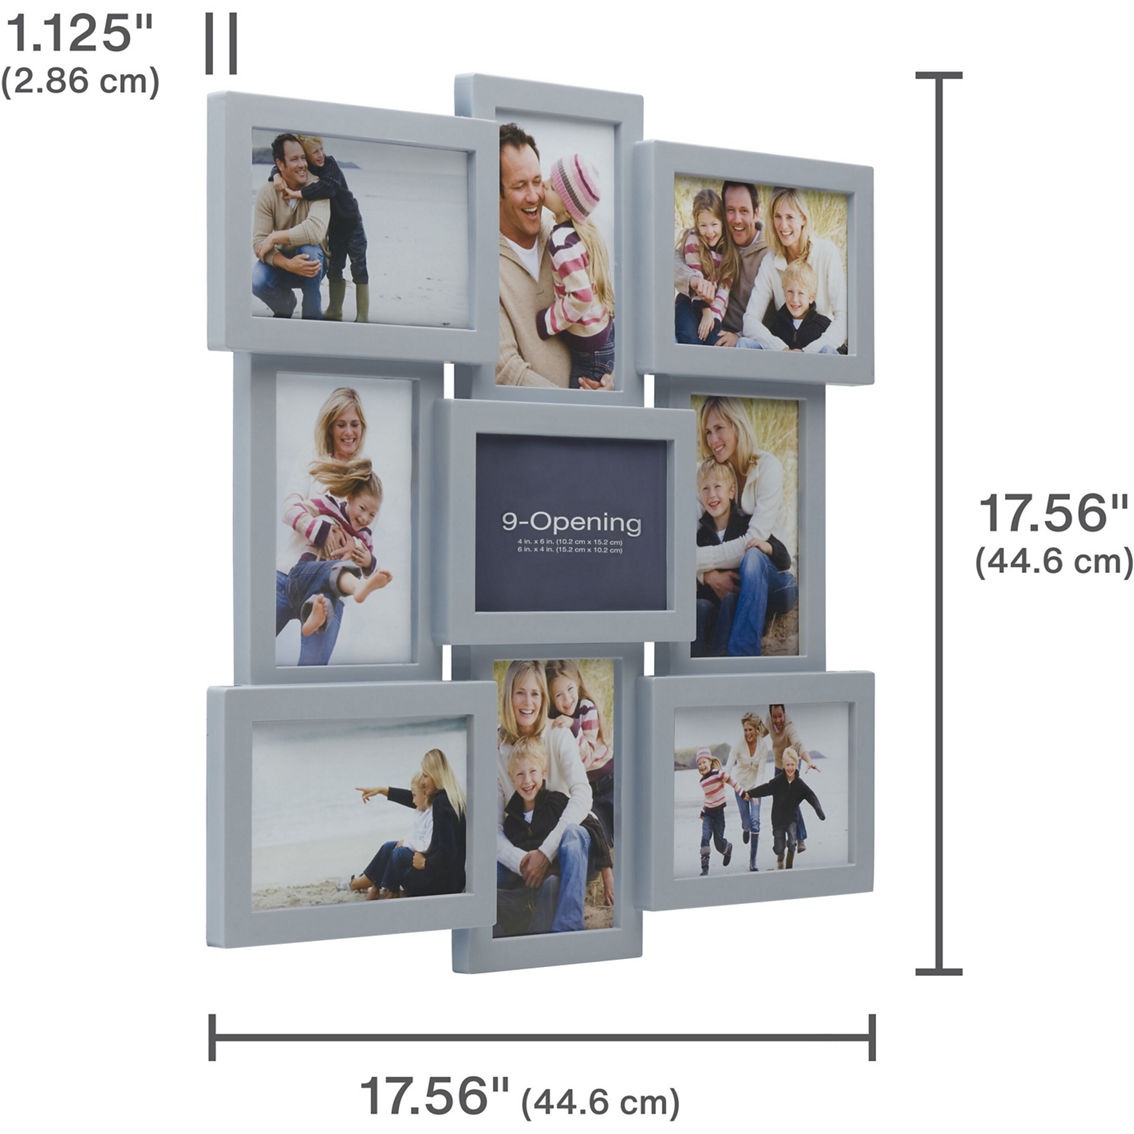 Melannco 18 x 18 in. Gray 9 Opening Photo Collage Frame - Image 5 of 5